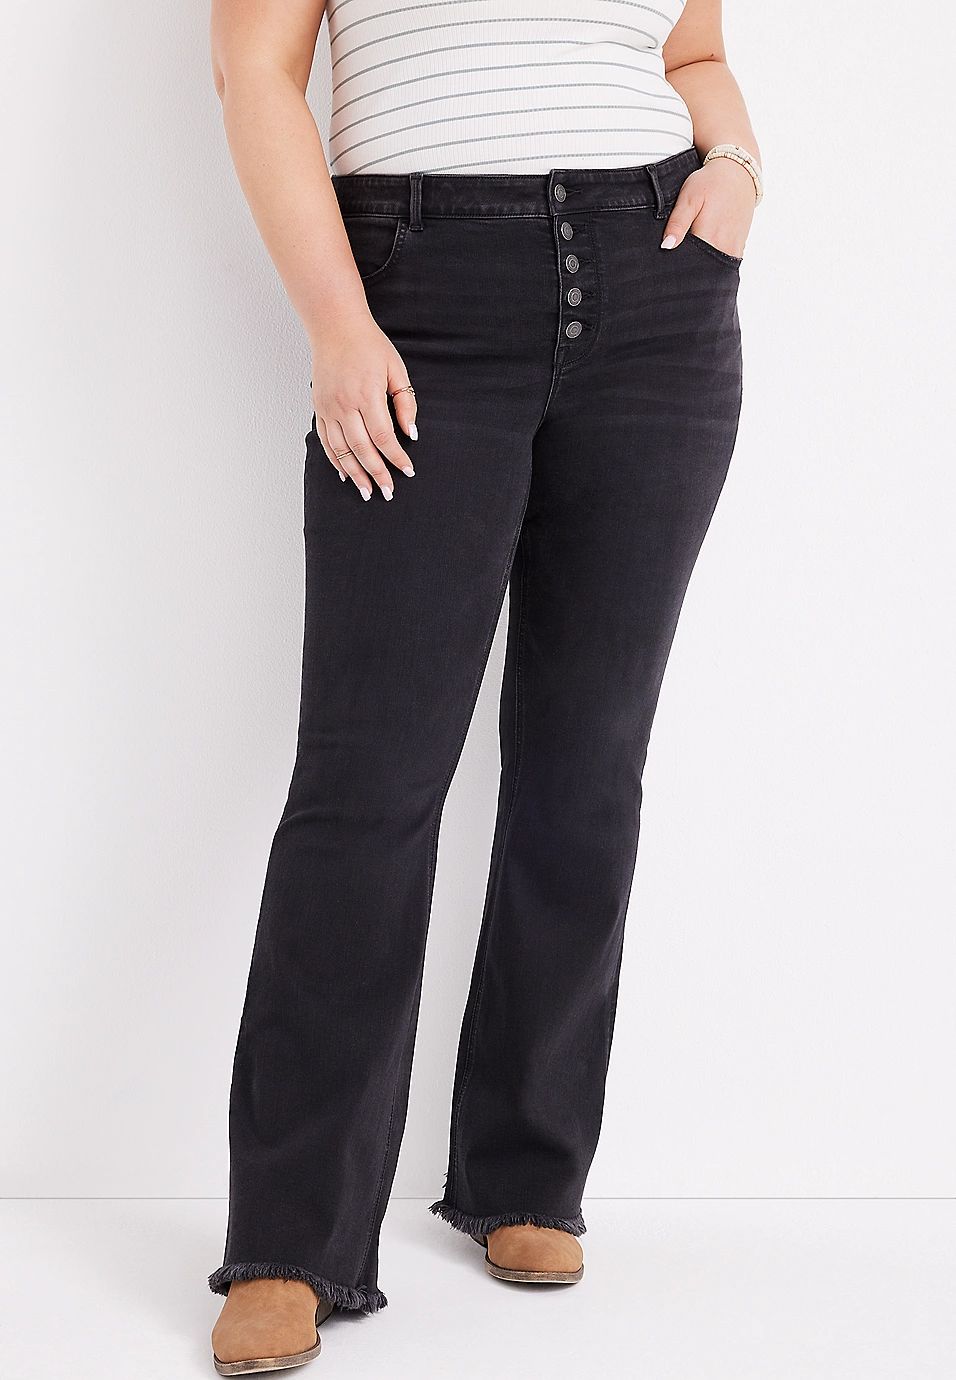 Plus Size m jeans by maurices™ Black Flare High Rise Jean | Maurices